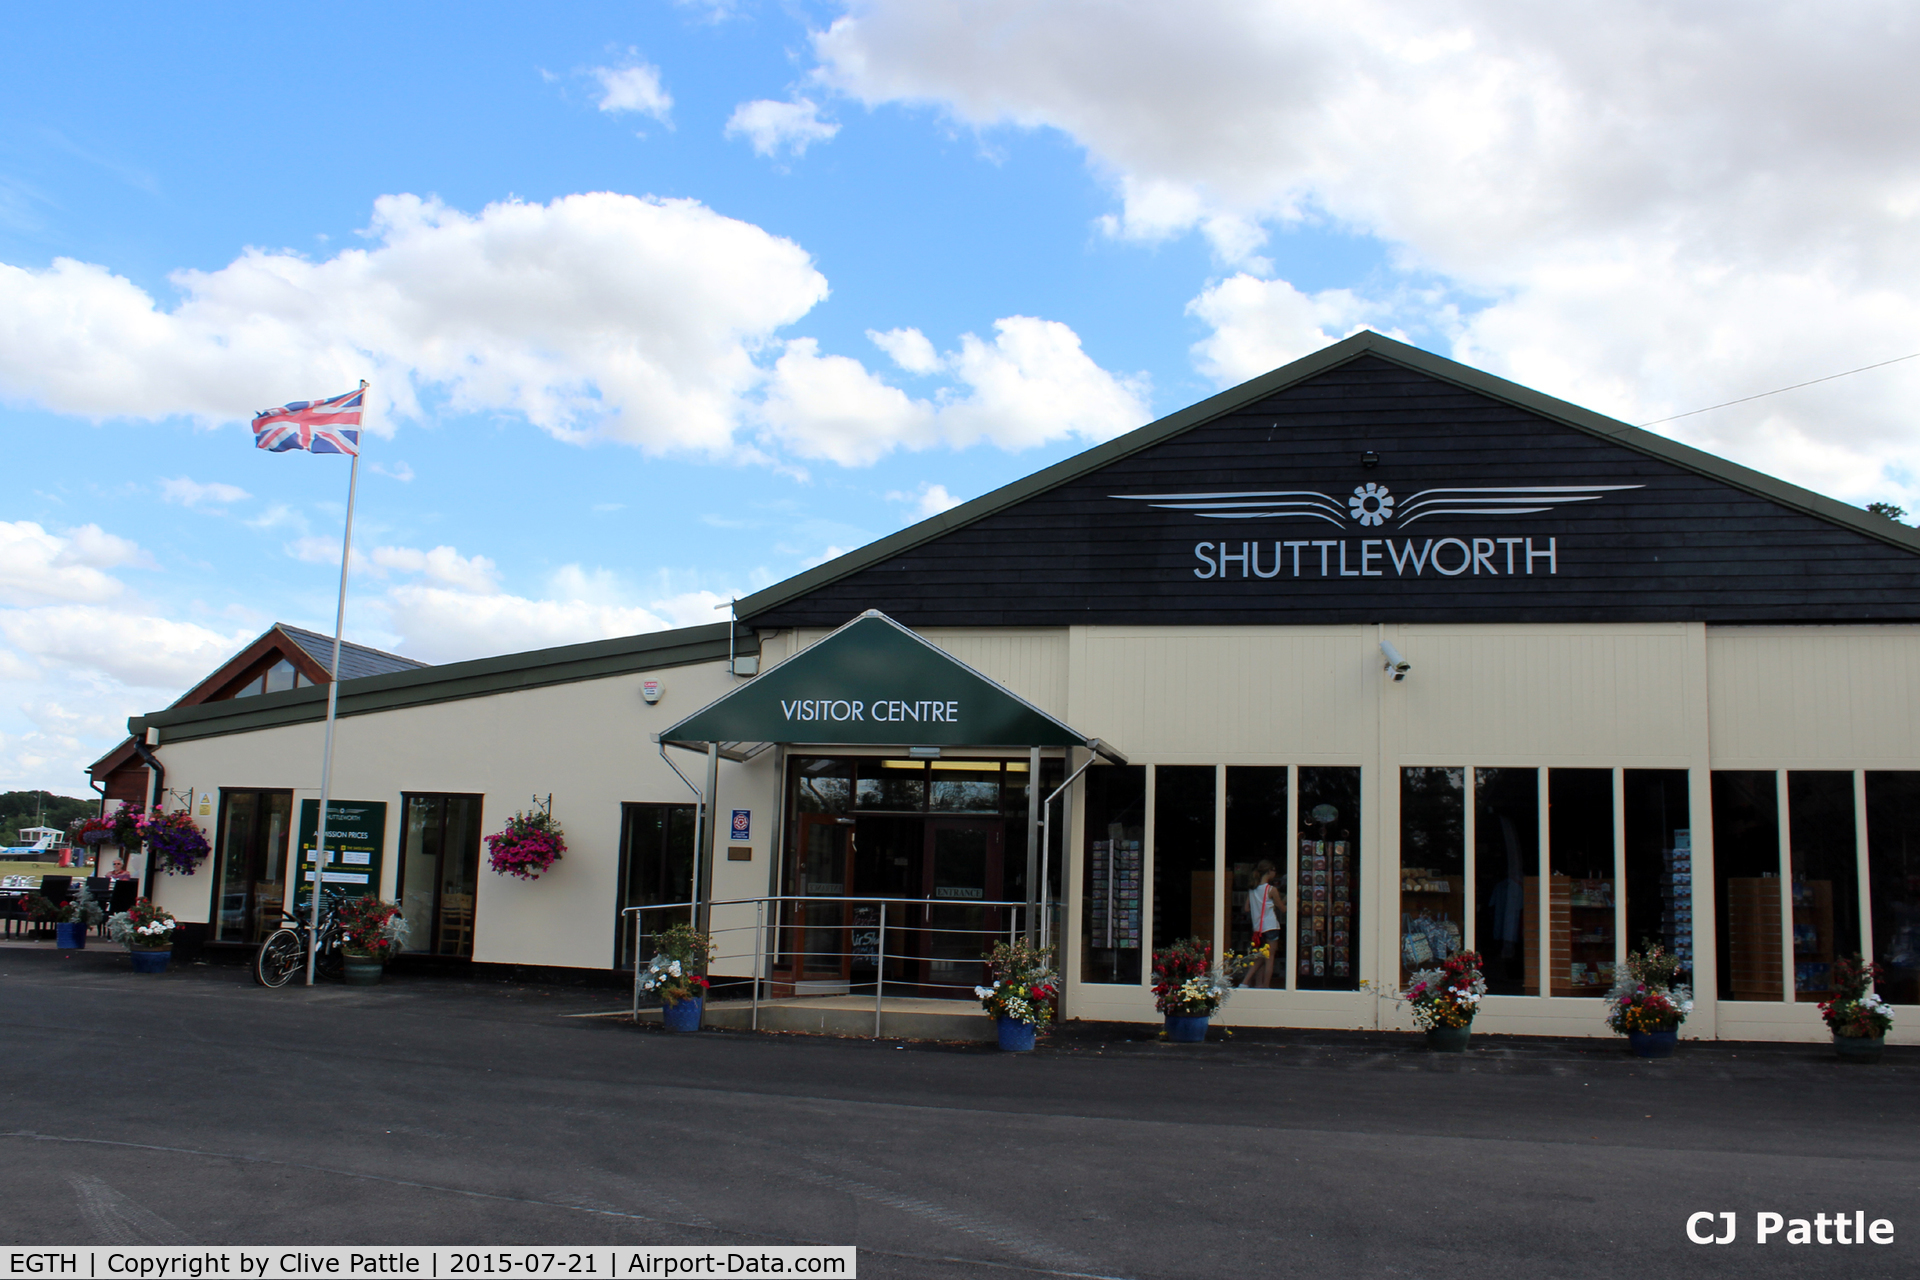 EGTH Airport - A view of the visitors reception area at The Shuttleworth Trust, Old Warden Airfield.